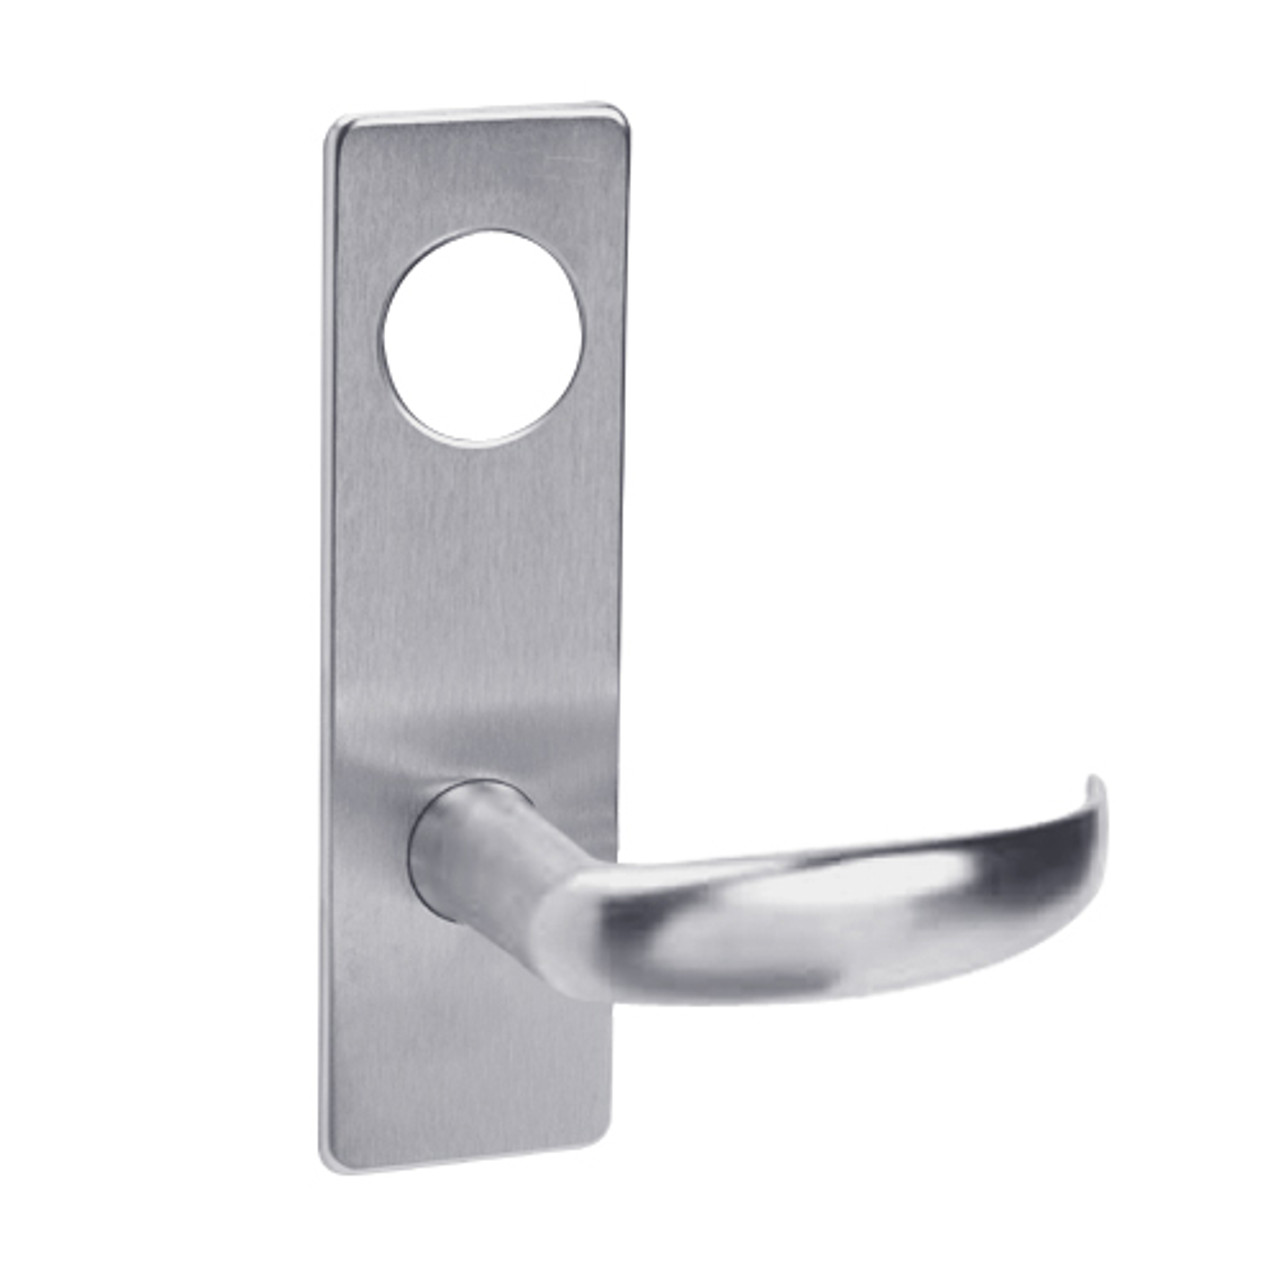 ML2055-PSP-626-M31 Corbin Russwin ML2000 Series Mortise Classroom Trim Pack with Princeton Lever in Satin Chrome